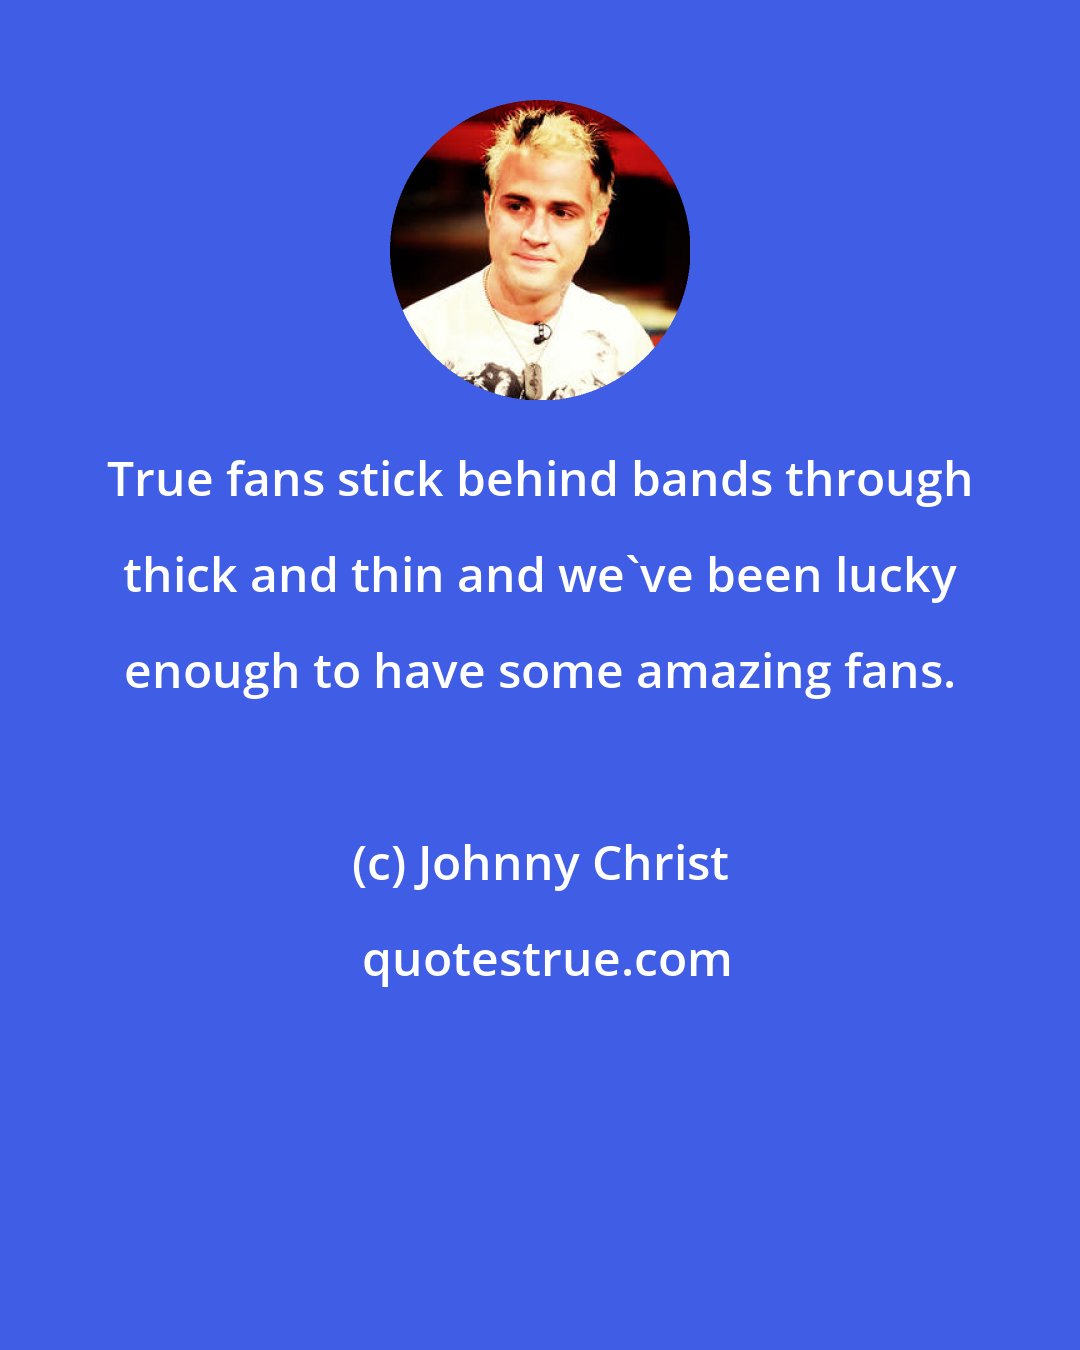 Johnny Christ: True fans stick behind bands through thick and thin and we've been lucky enough to have some amazing fans.